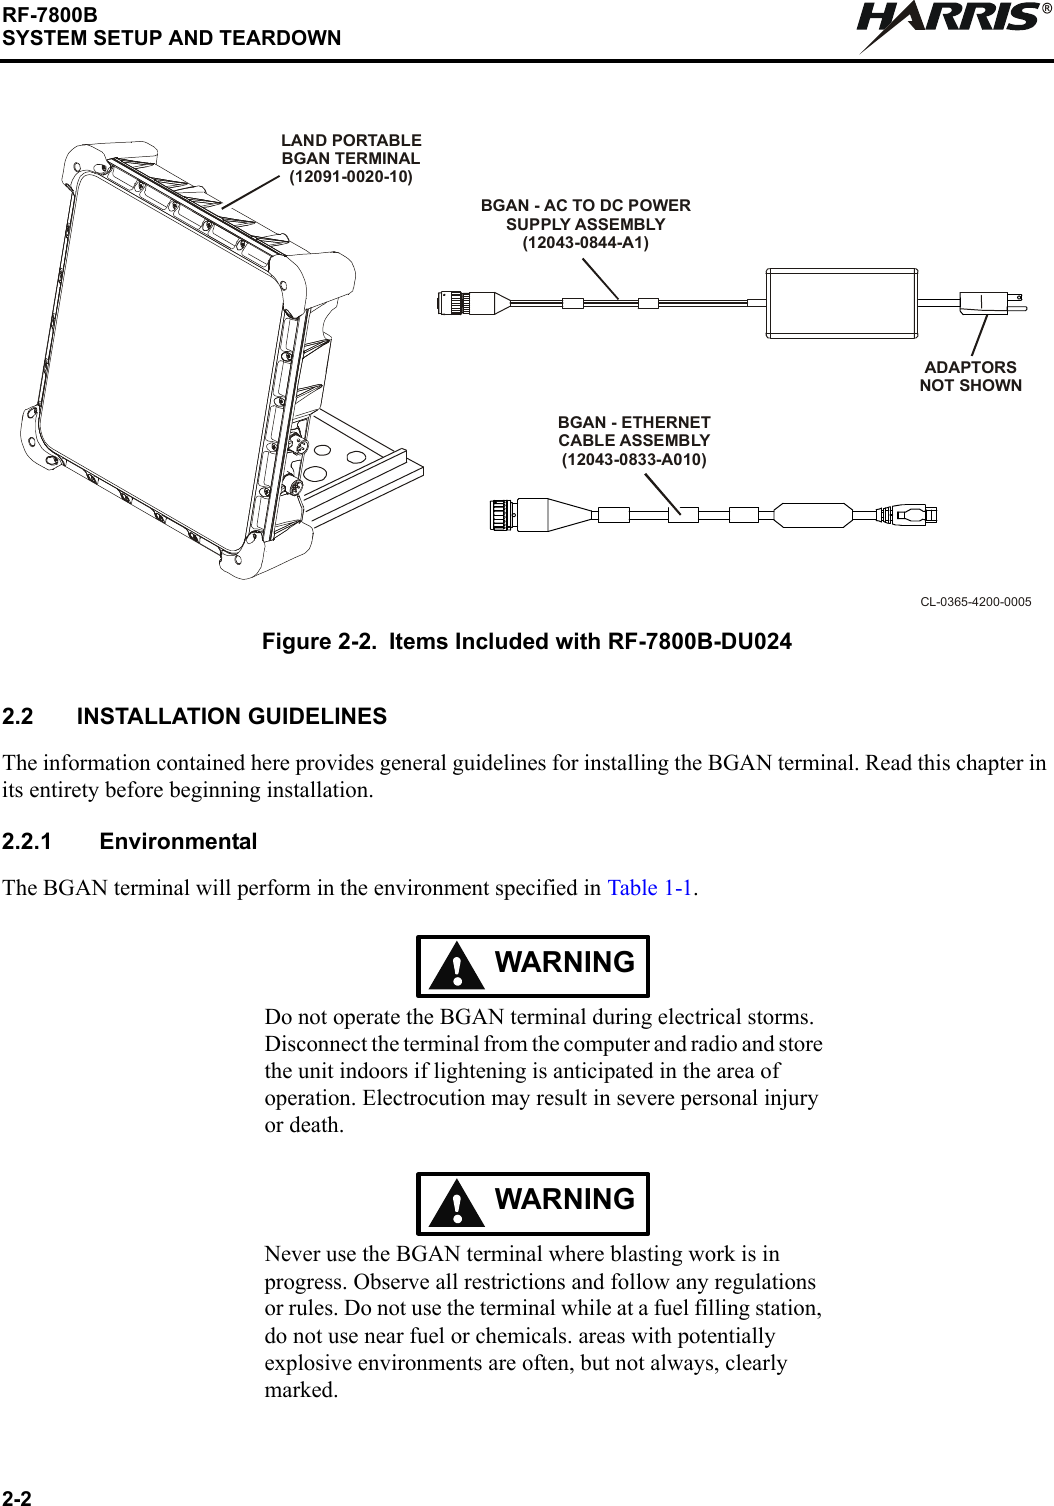 2-2RF-7800BSYSTEM SETUP AND TEARDOWNR2.2 INSTALLATION GUIDELINESThe information contained here provides general guidelines for installing the BGAN terminal. Read this chapter in its entirety before beginning installation.2.2.1 EnvironmentalThe BGAN terminal will perform in the environment specified in Table 1-1.WARNINGDo not operate the BGAN terminal during electrical storms. Disconnect the terminal from the computer and radio and store the unit indoors if lightening is anticipated in the area of operation. Electrocution may result in severe personal injury or death.WARNINGNever use the BGAN terminal where blasting work is in progress. Observe all restrictions and follow any regulations or rules. Do not use the terminal while at a fuel filling station, do not use near fuel or chemicals. areas with potentially explosive environments are often, but not always, clearly marked. Figure 2-2. Items Included with RF-7800B-DU024CL-0365-4200-0005BGAN - AC TO DC POWERSUPPLY ASSEMBLY(12043-0844-A1)ADAPTORSNOT SHOWNBGAN - ETHERNET CABLE ASSEMBLY(12043-0833-A010)LAND PORTABLEBGAN TERMINAL(12091-0020-10)